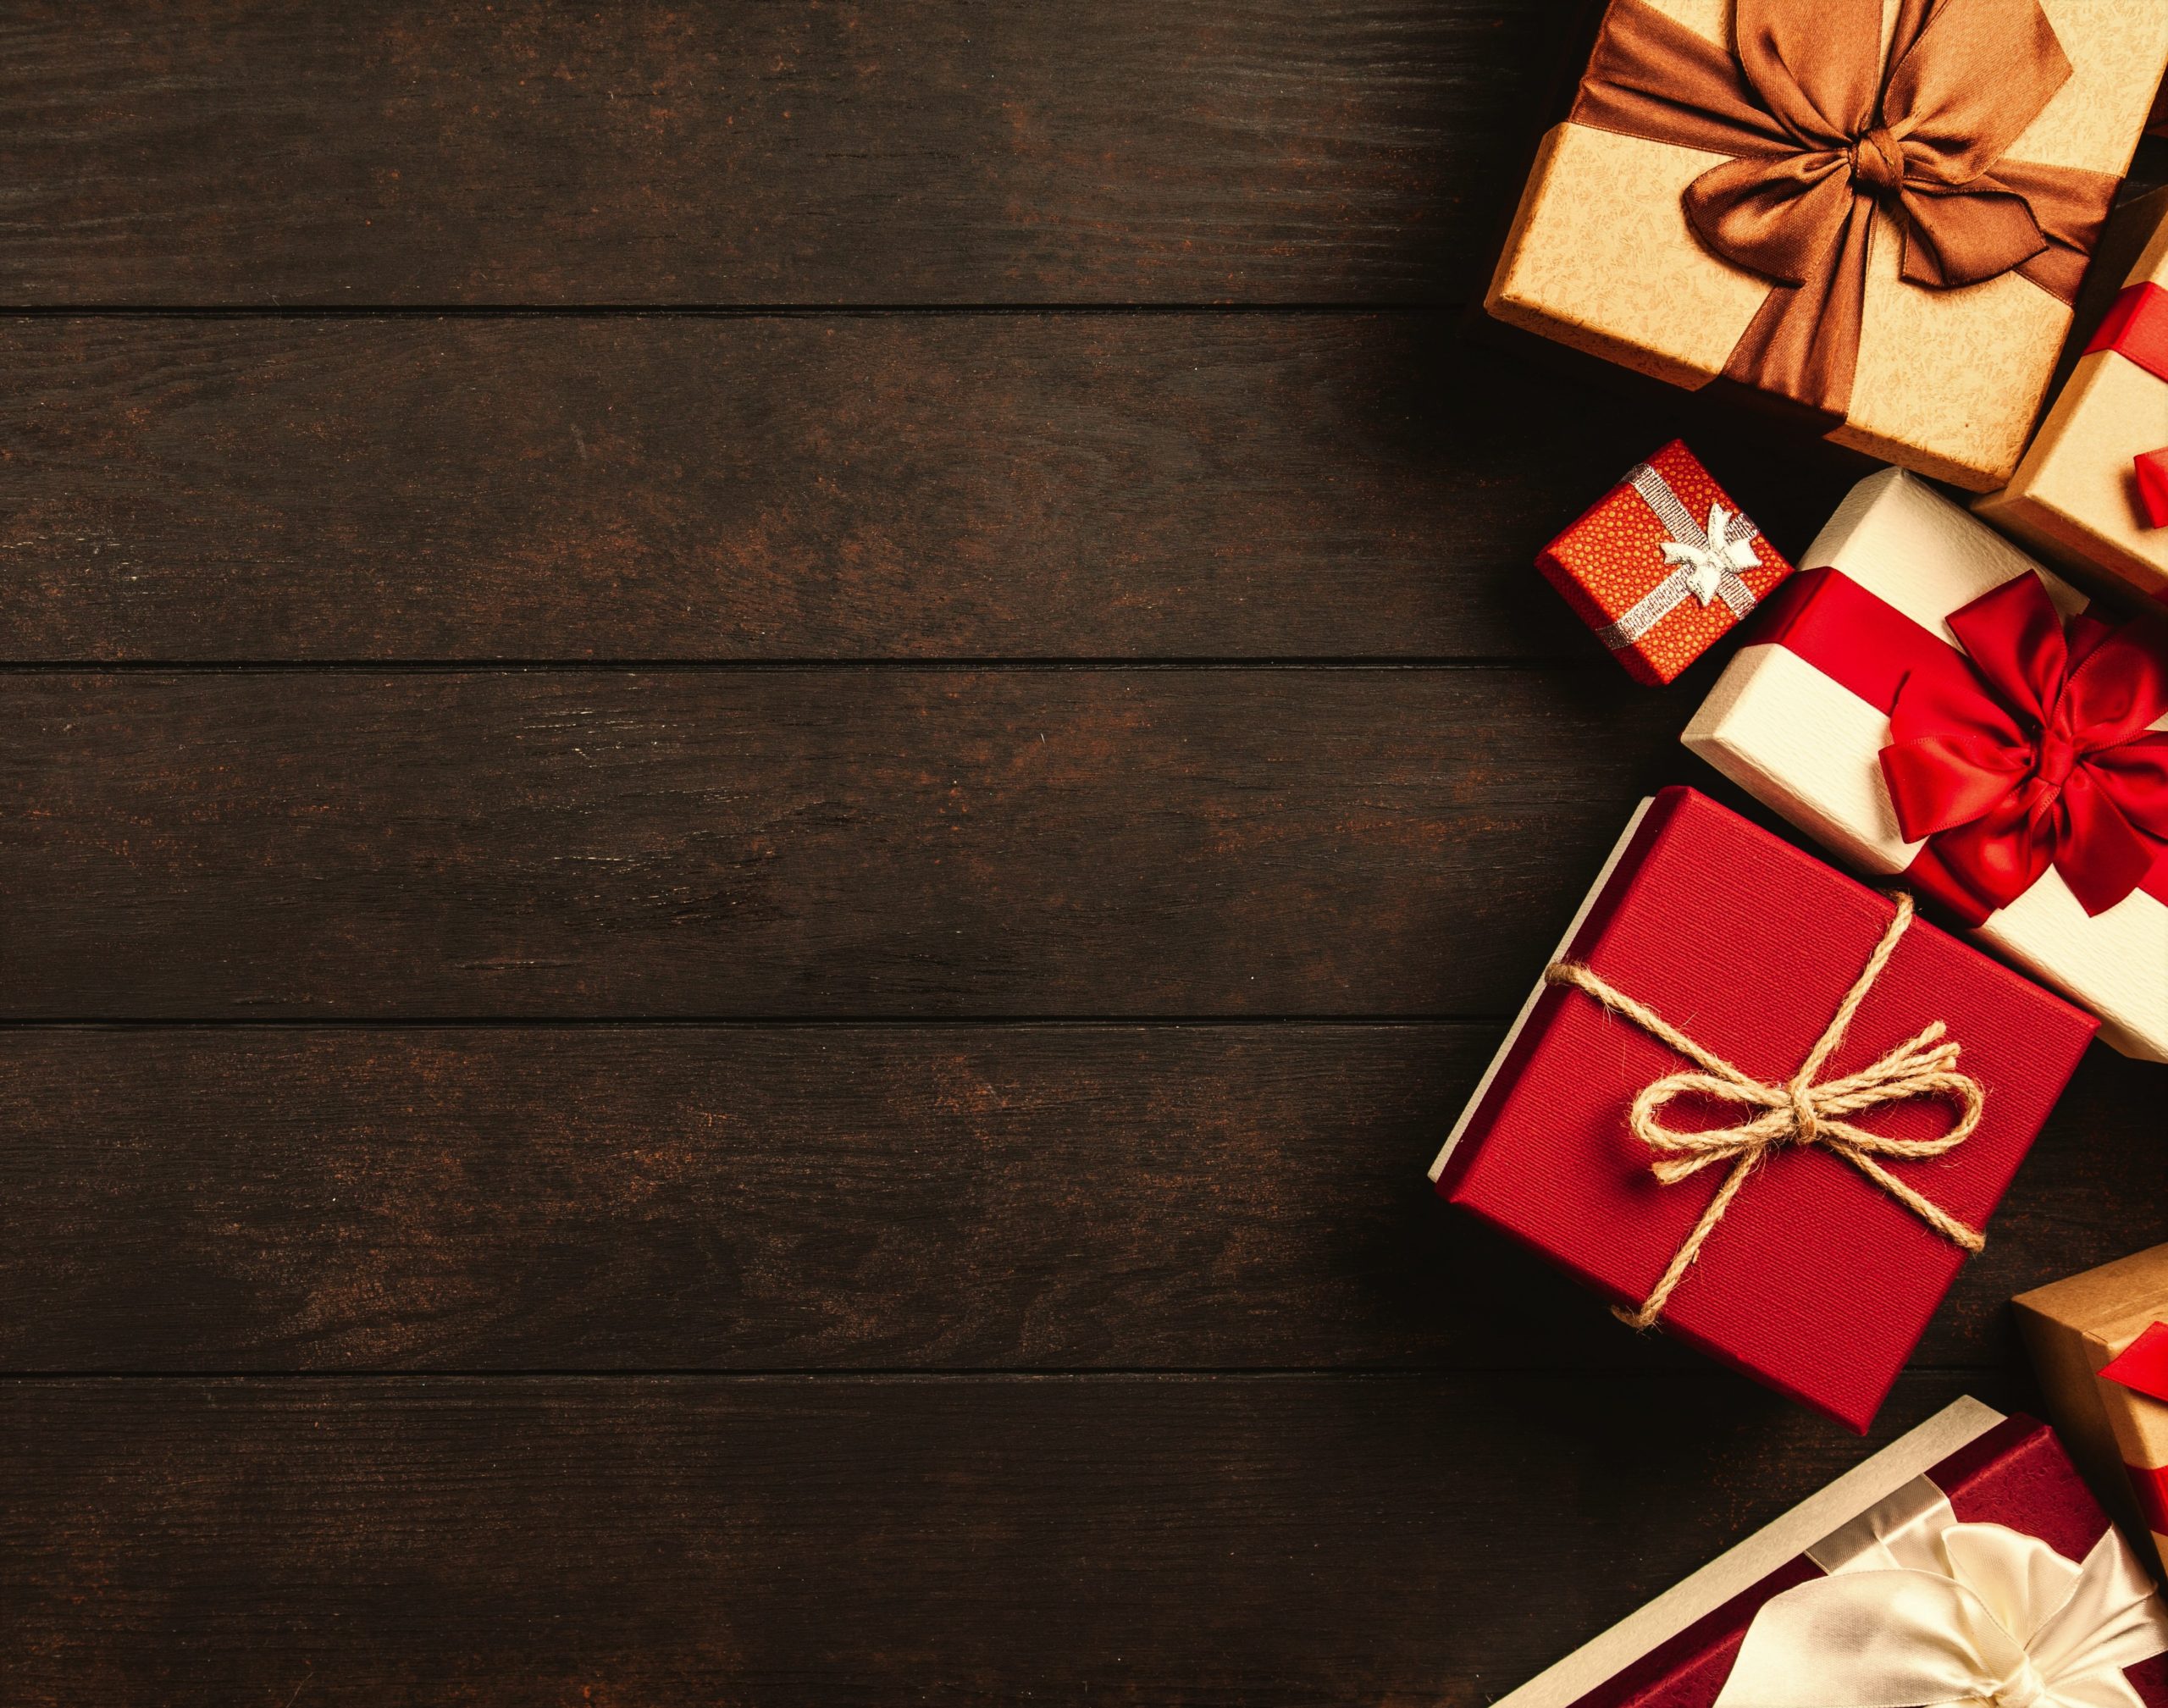 Top 5 tips on Saving Money on Gifts